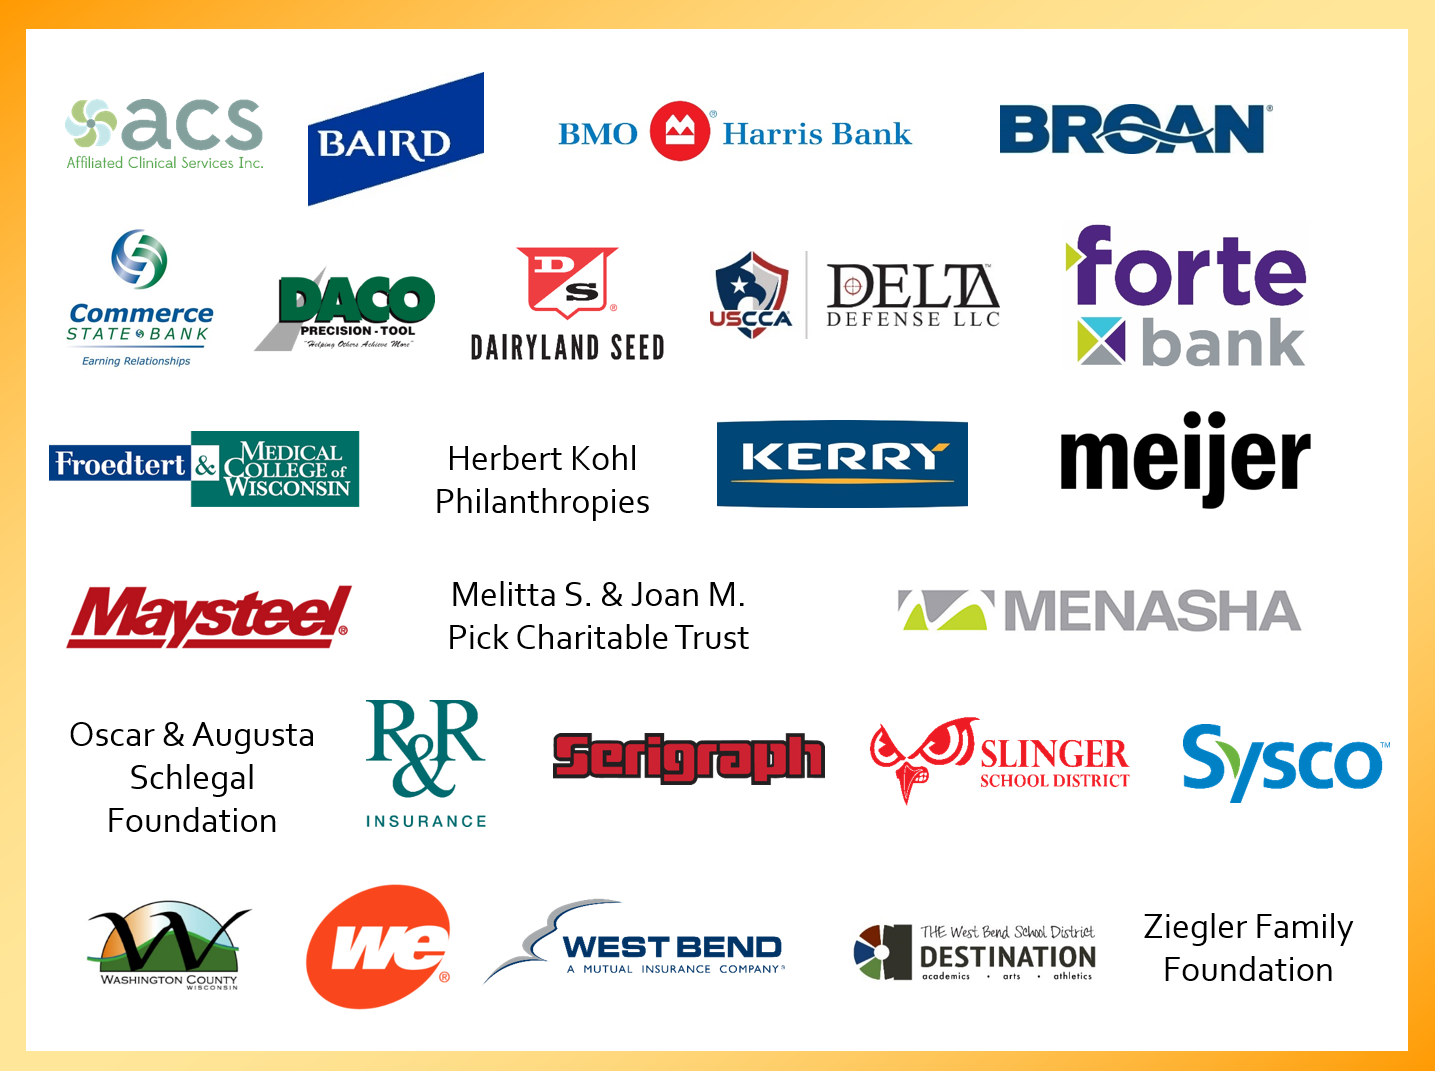 Image of the companies that donated $10,000 or more to the United way campaign.